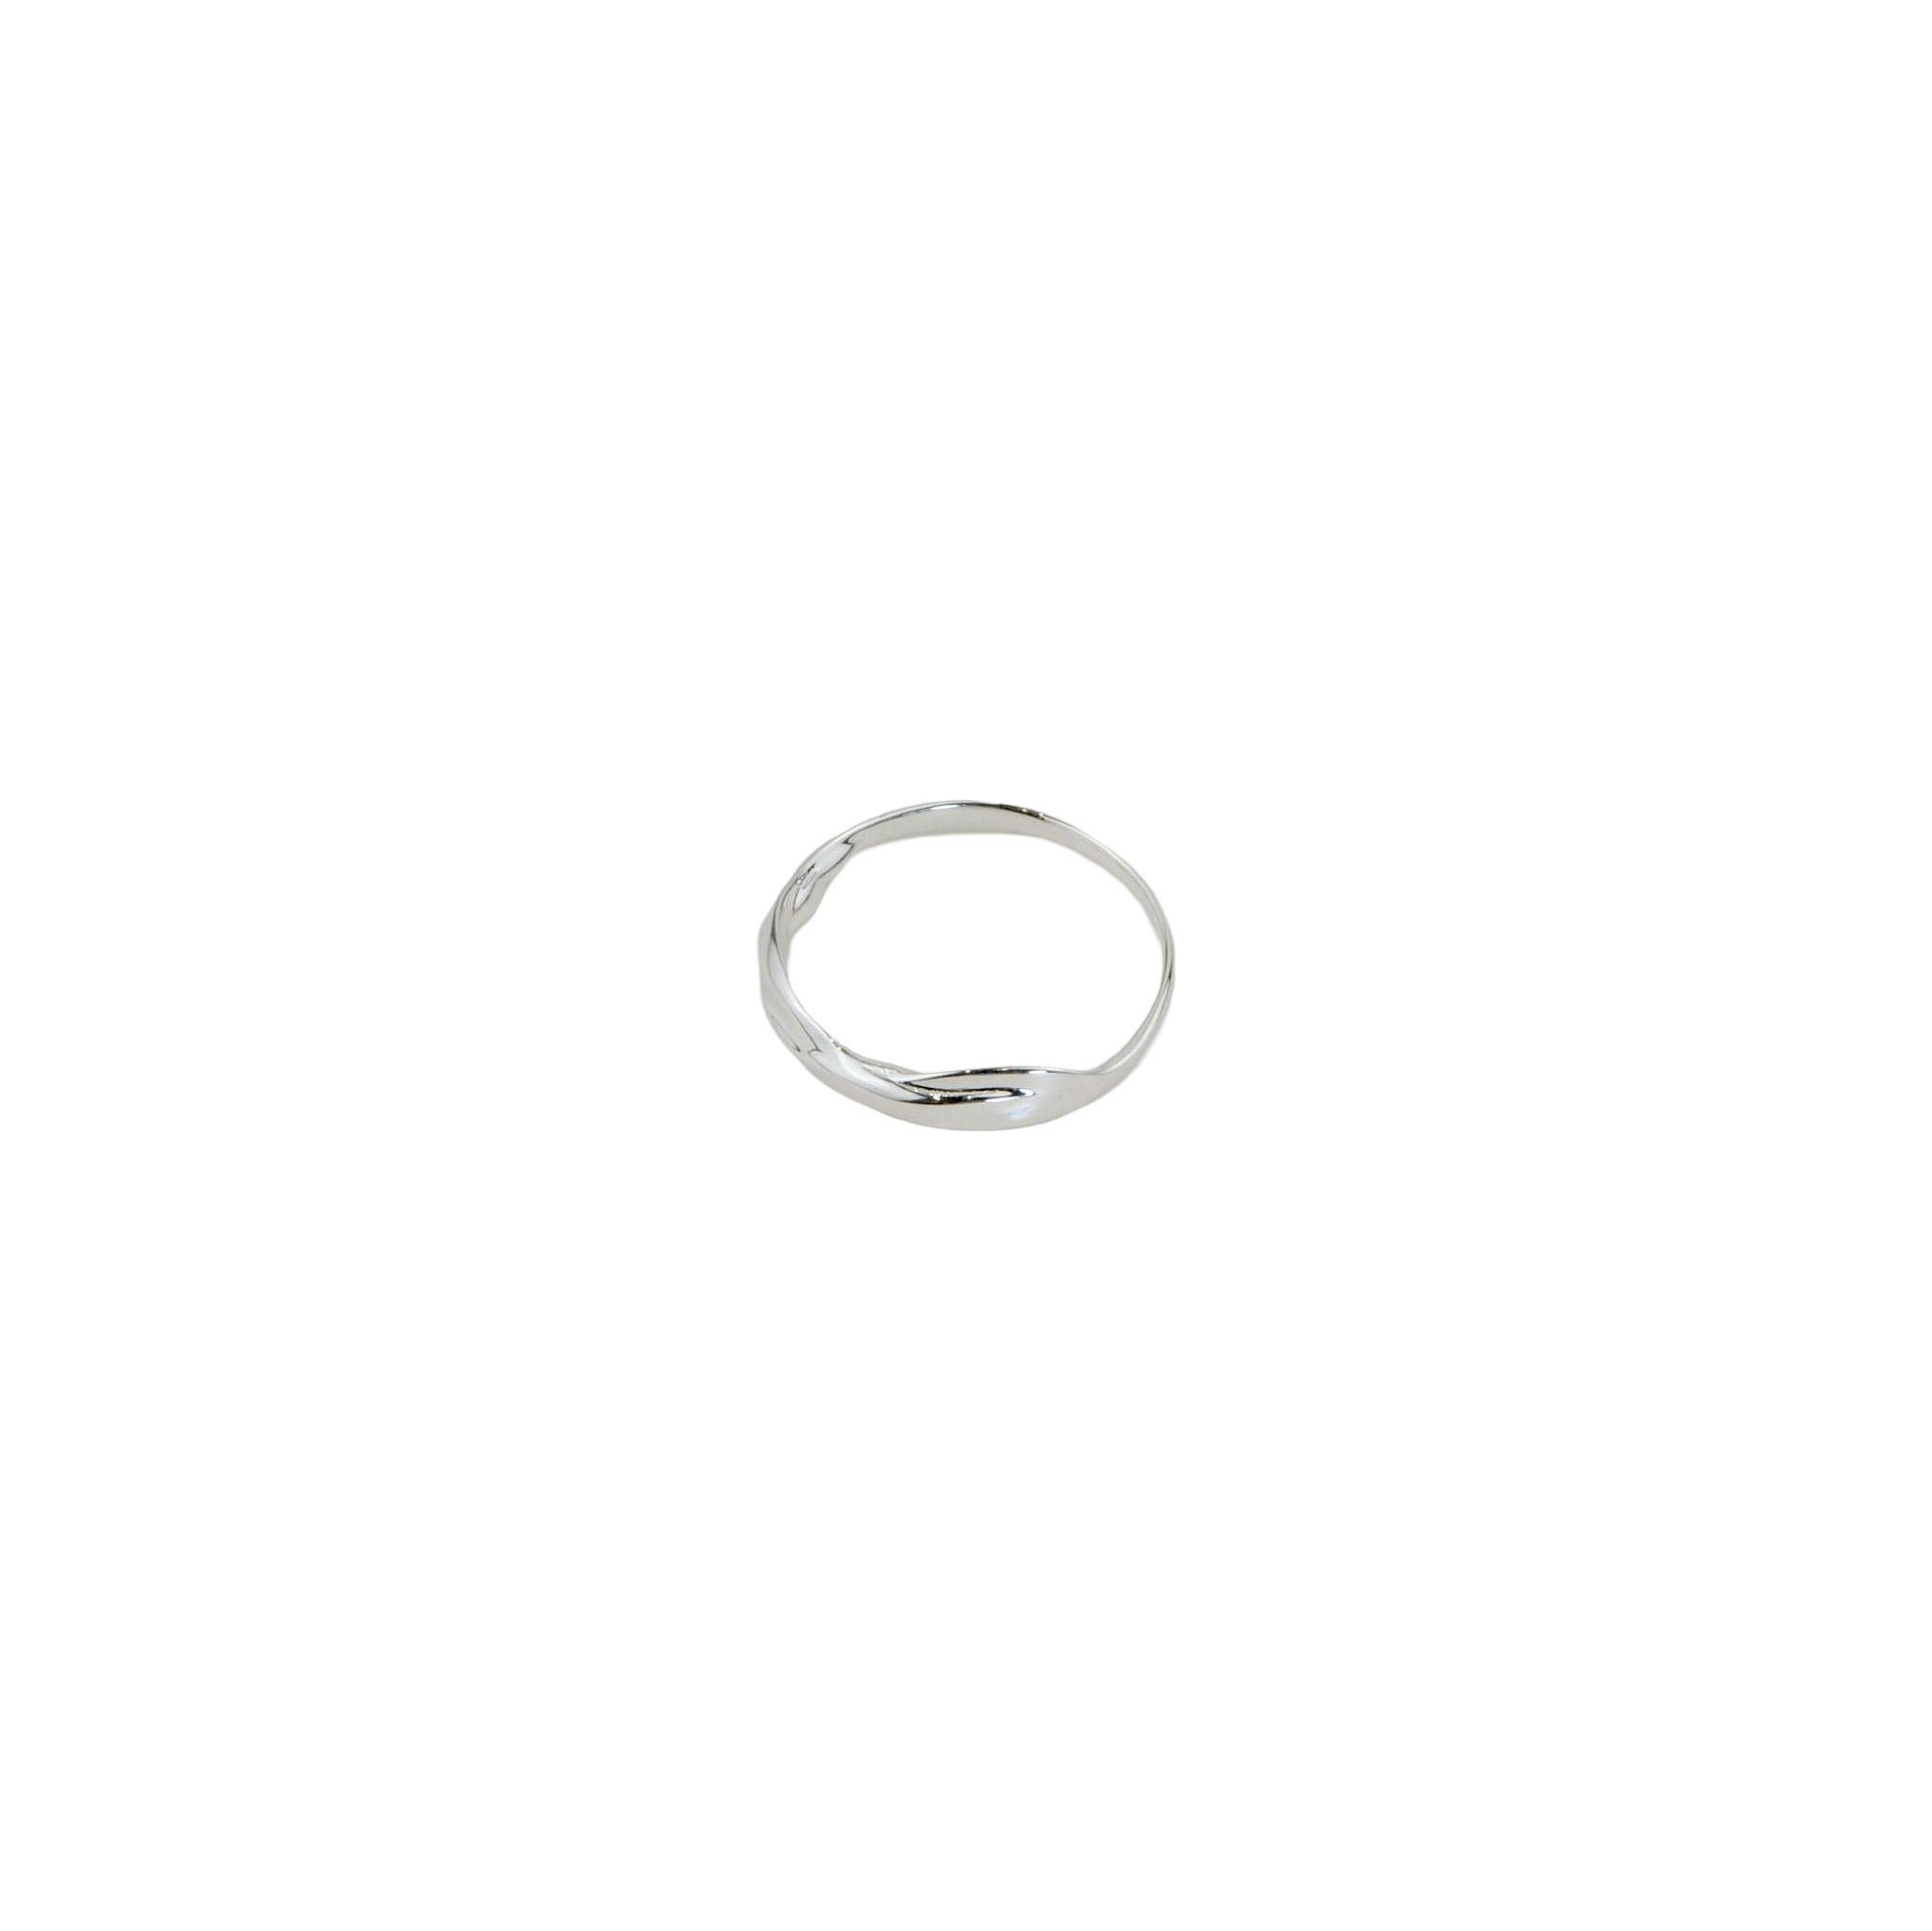 Alsolike Eternal Circle Thin Ring